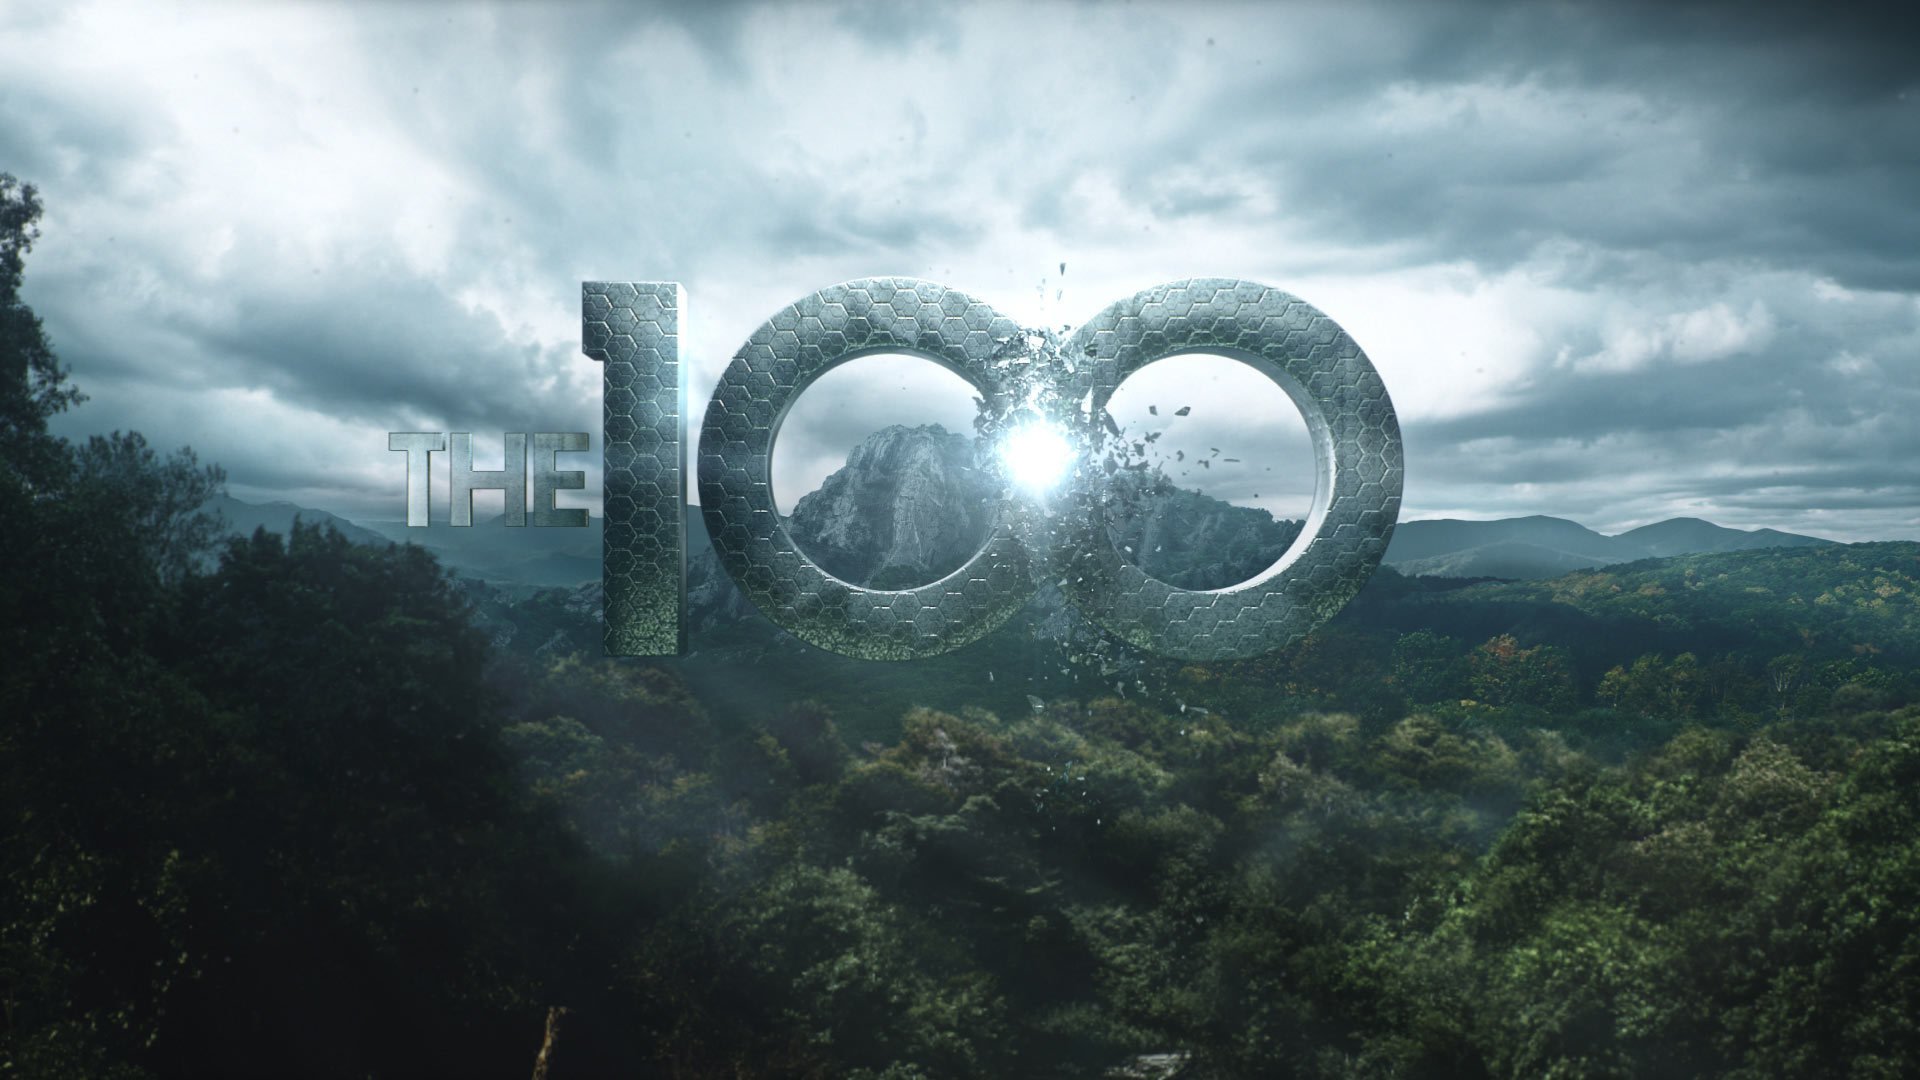 The 100 Tv Show 4K Wallpapers